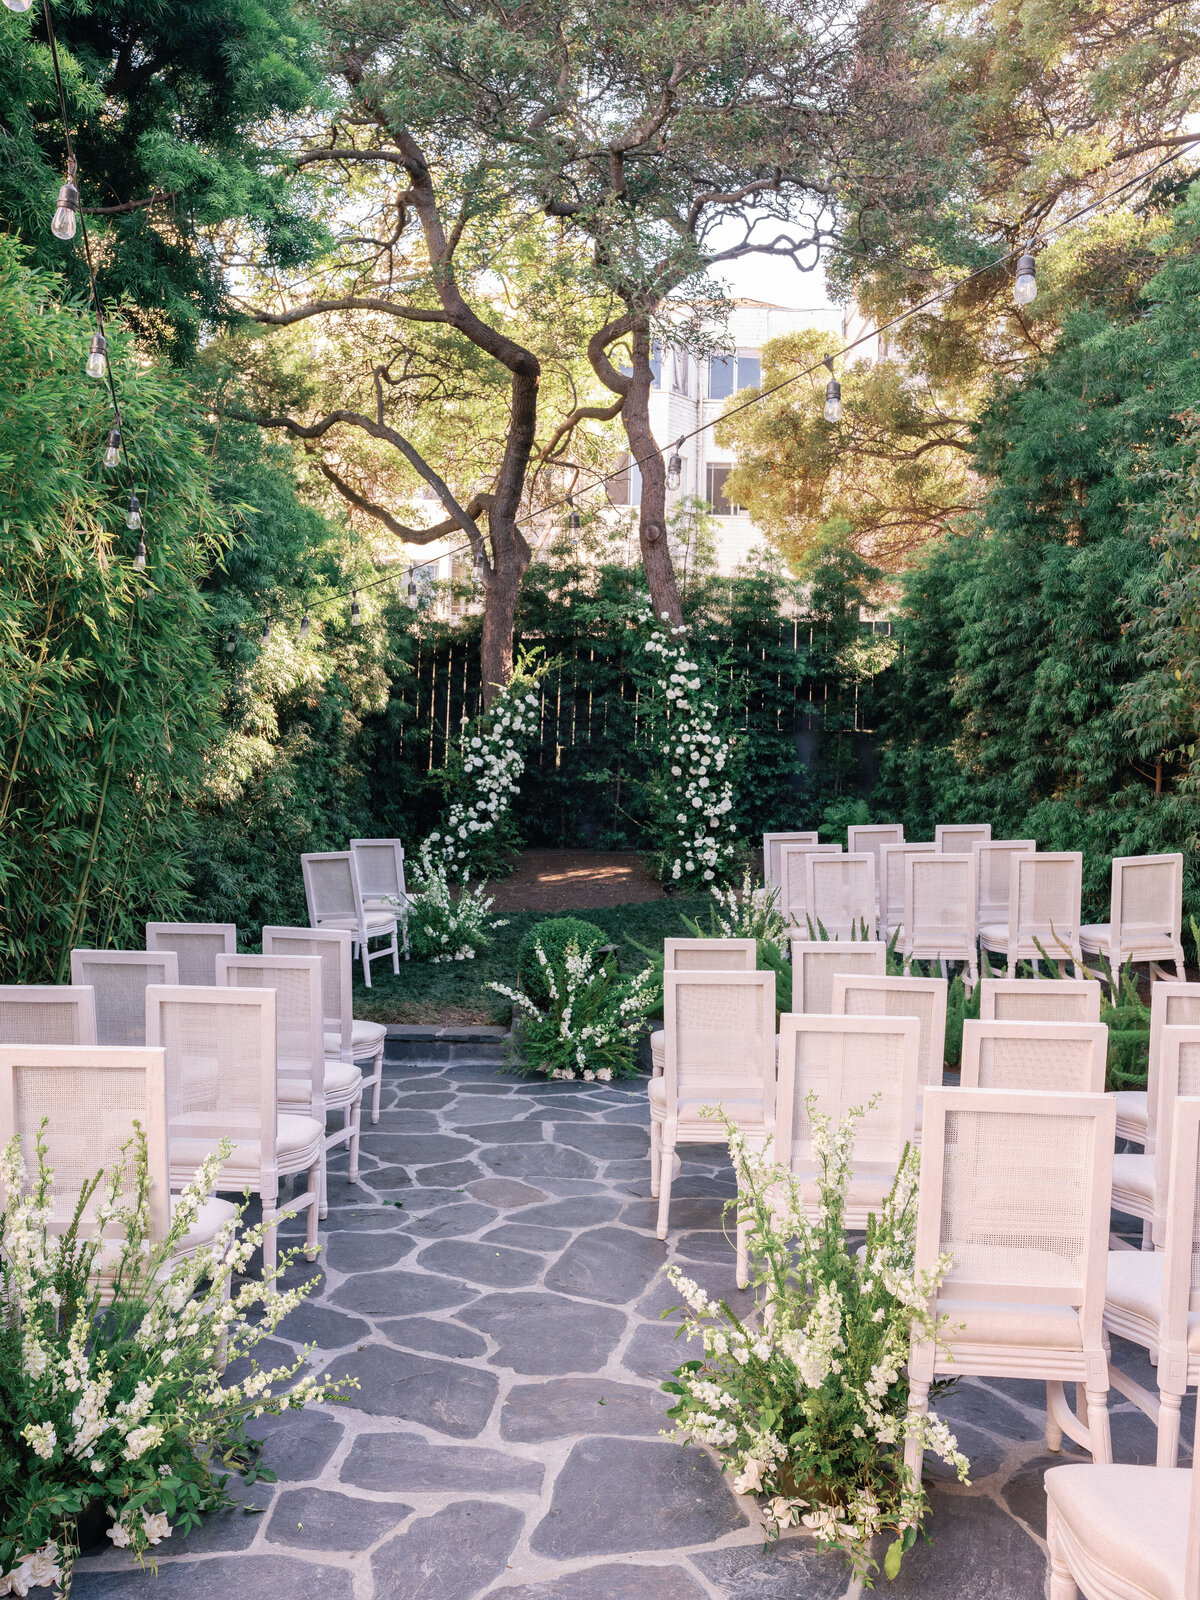 minimal and classic intimate wedding ceremony design using hensley event rentals for chairs and max gill design for flowers and altar.